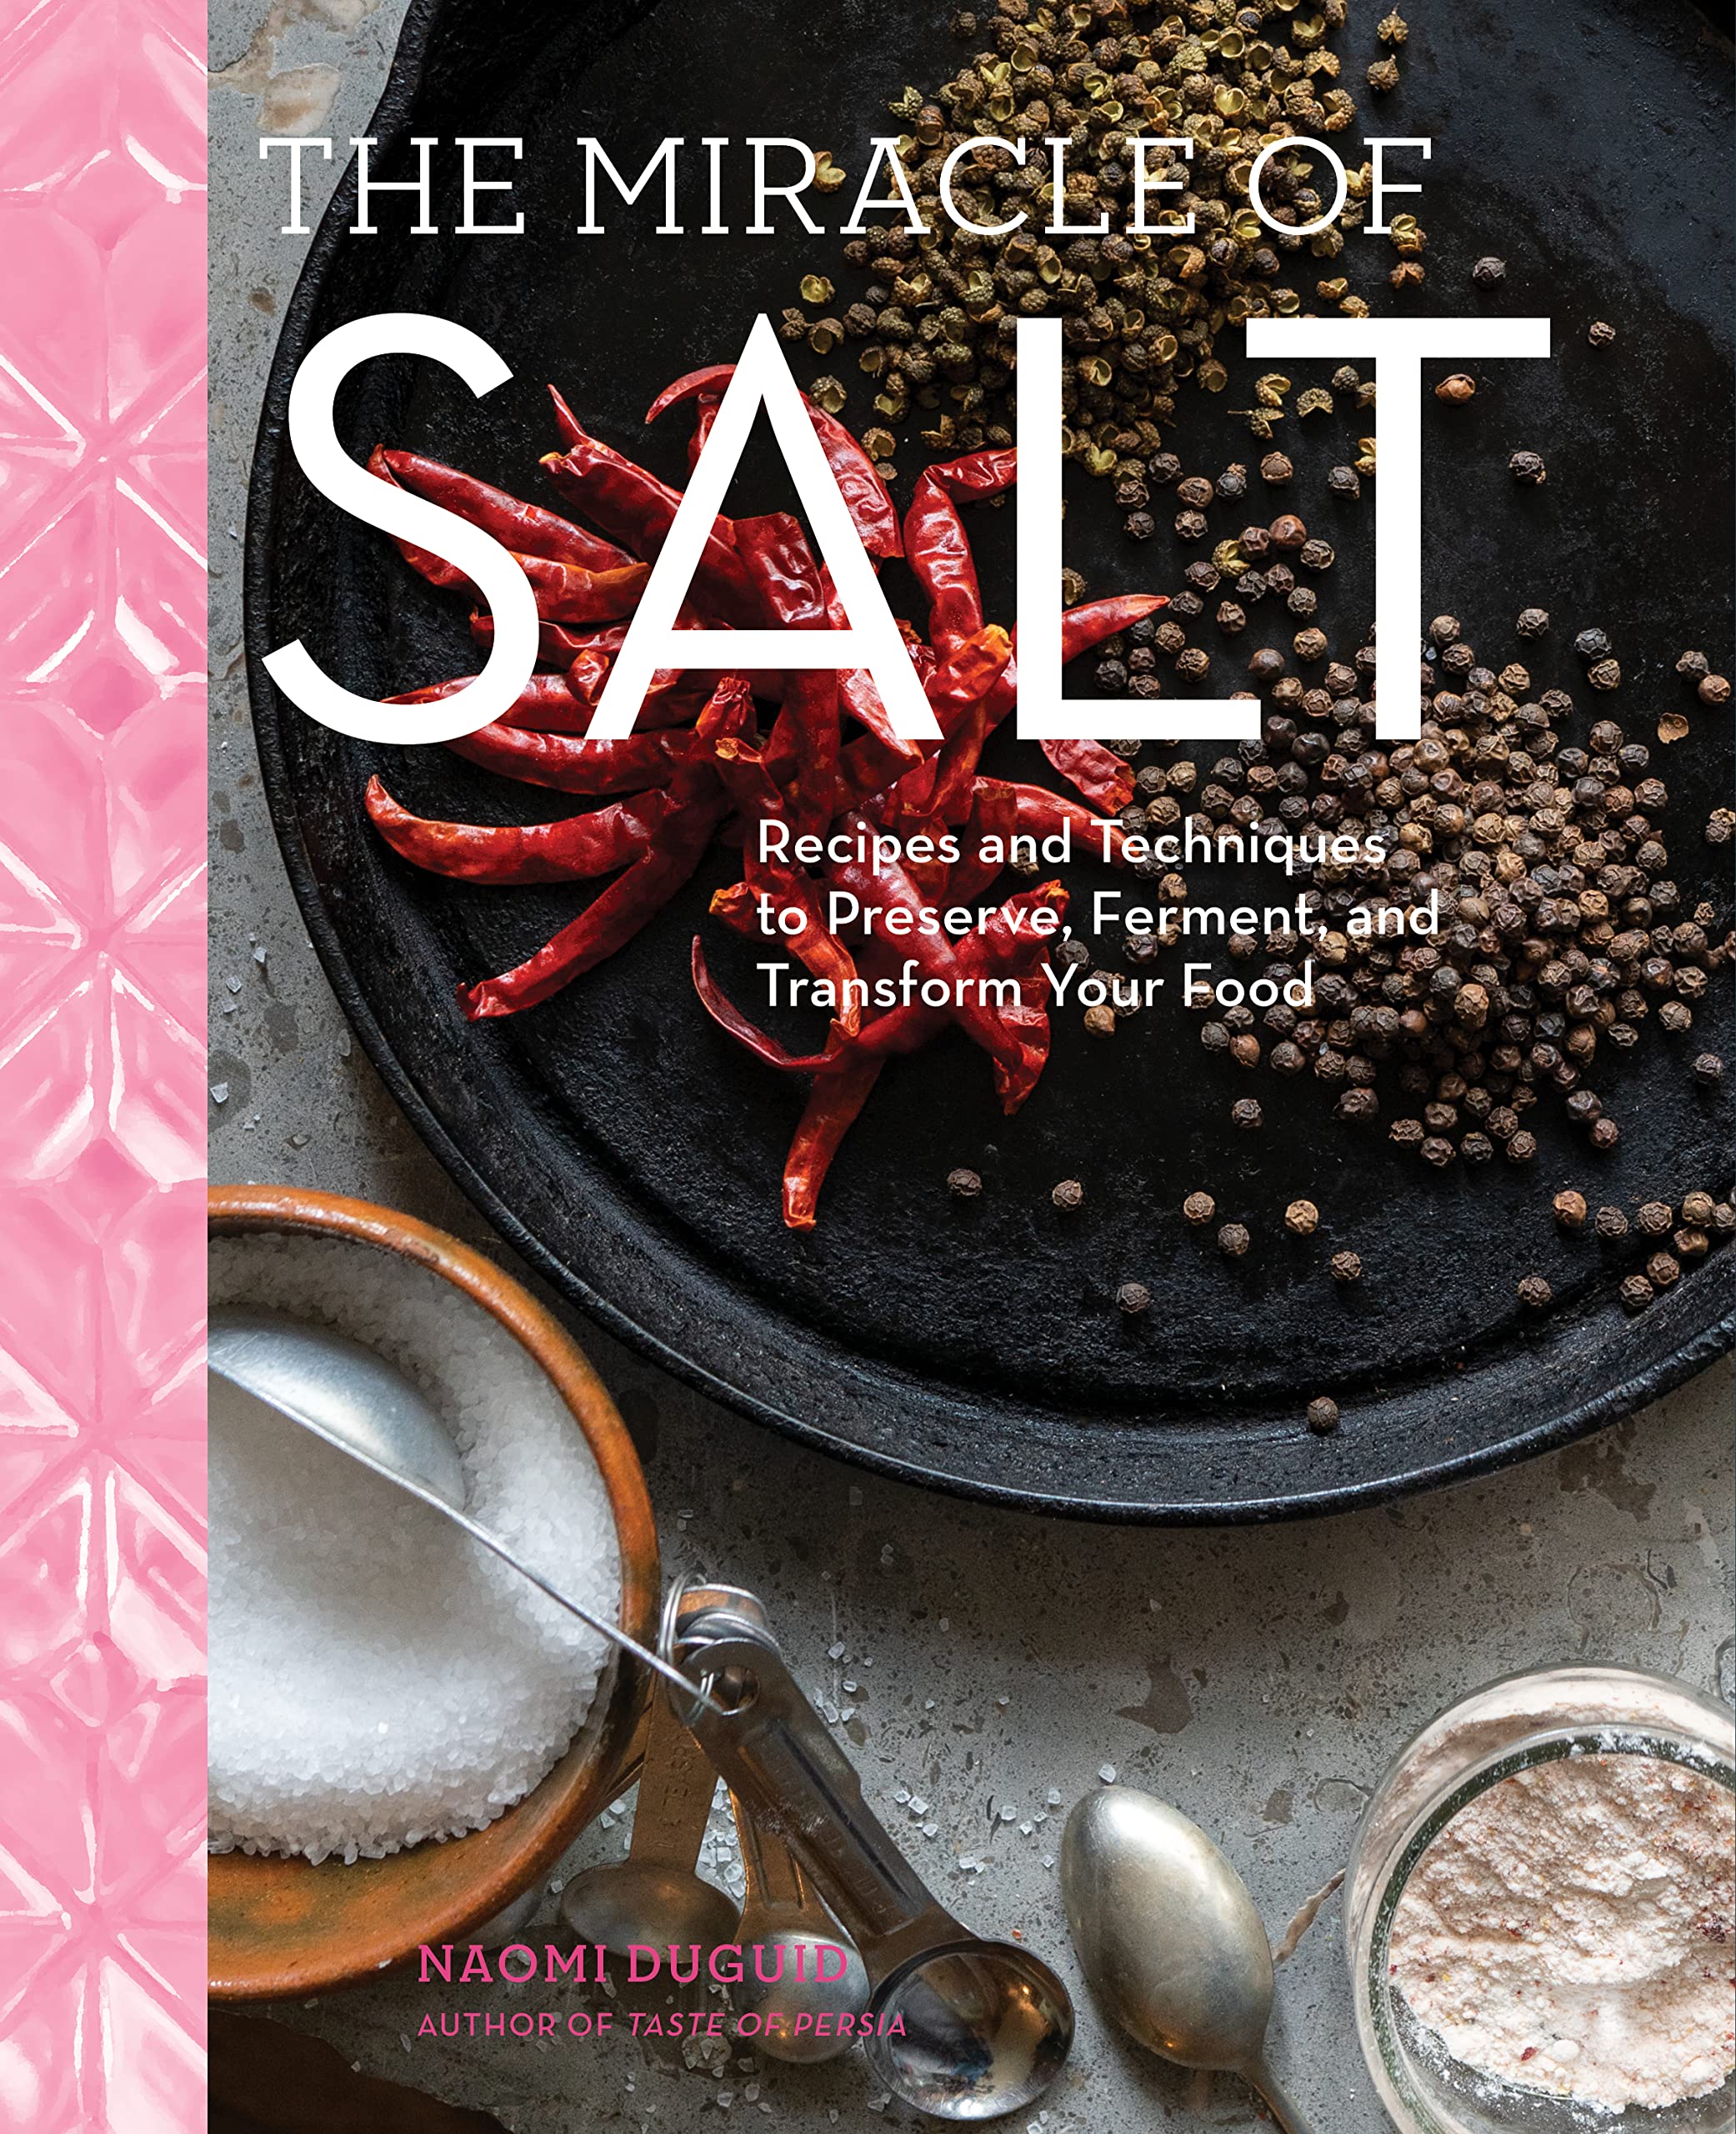 The Miracle of Salt: Recipes and Techniques to Preserve, Ferment, and Transform Your Food (Naomi Duguid)